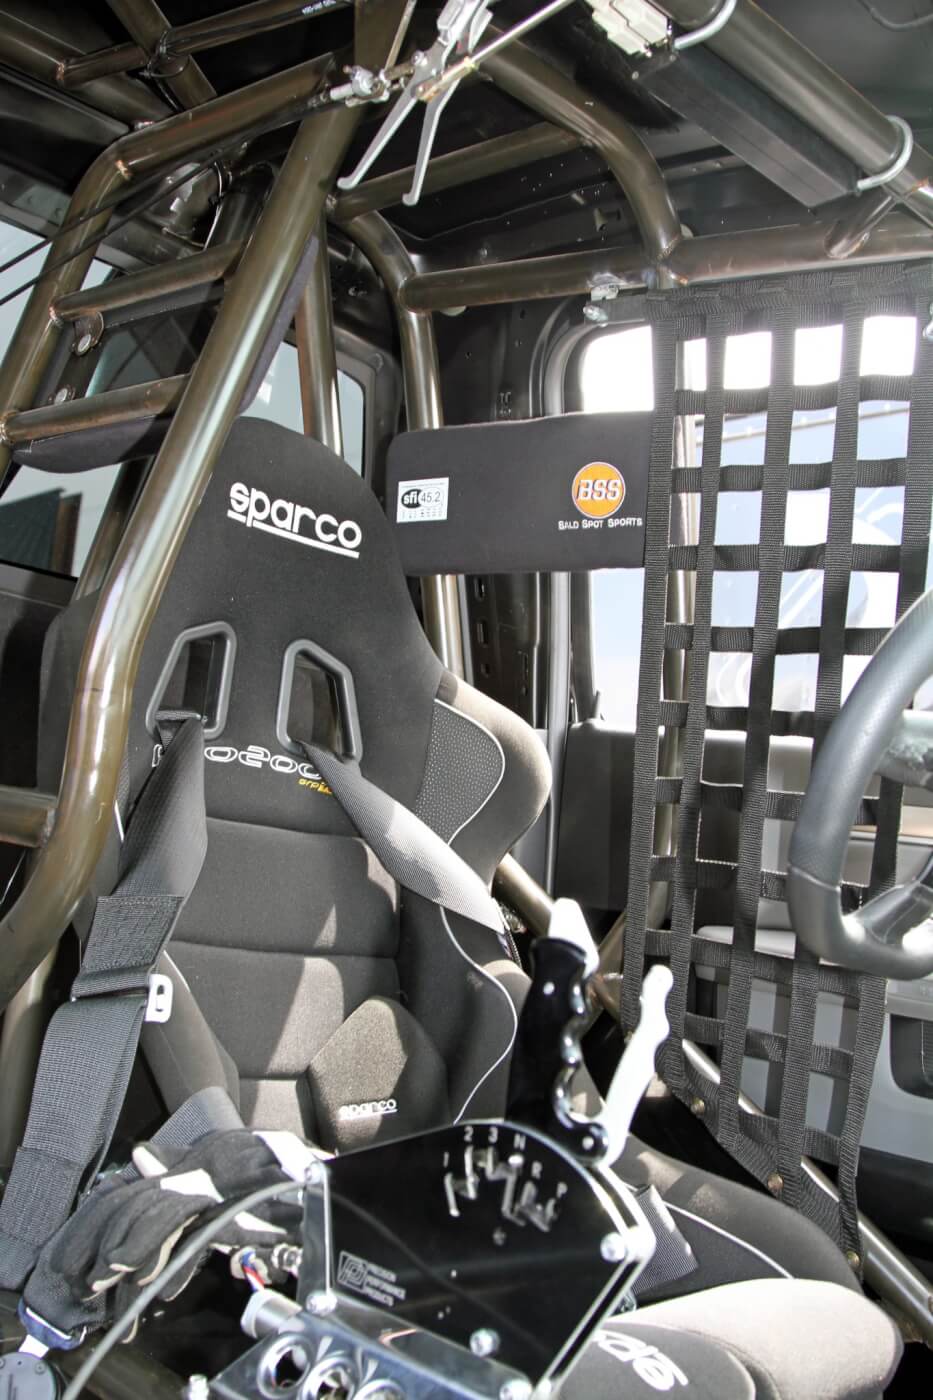 Tony Durhammer wrapped the roll cage around the Sparco Pro2000 race seat to provide Milliken with plenty of protection.